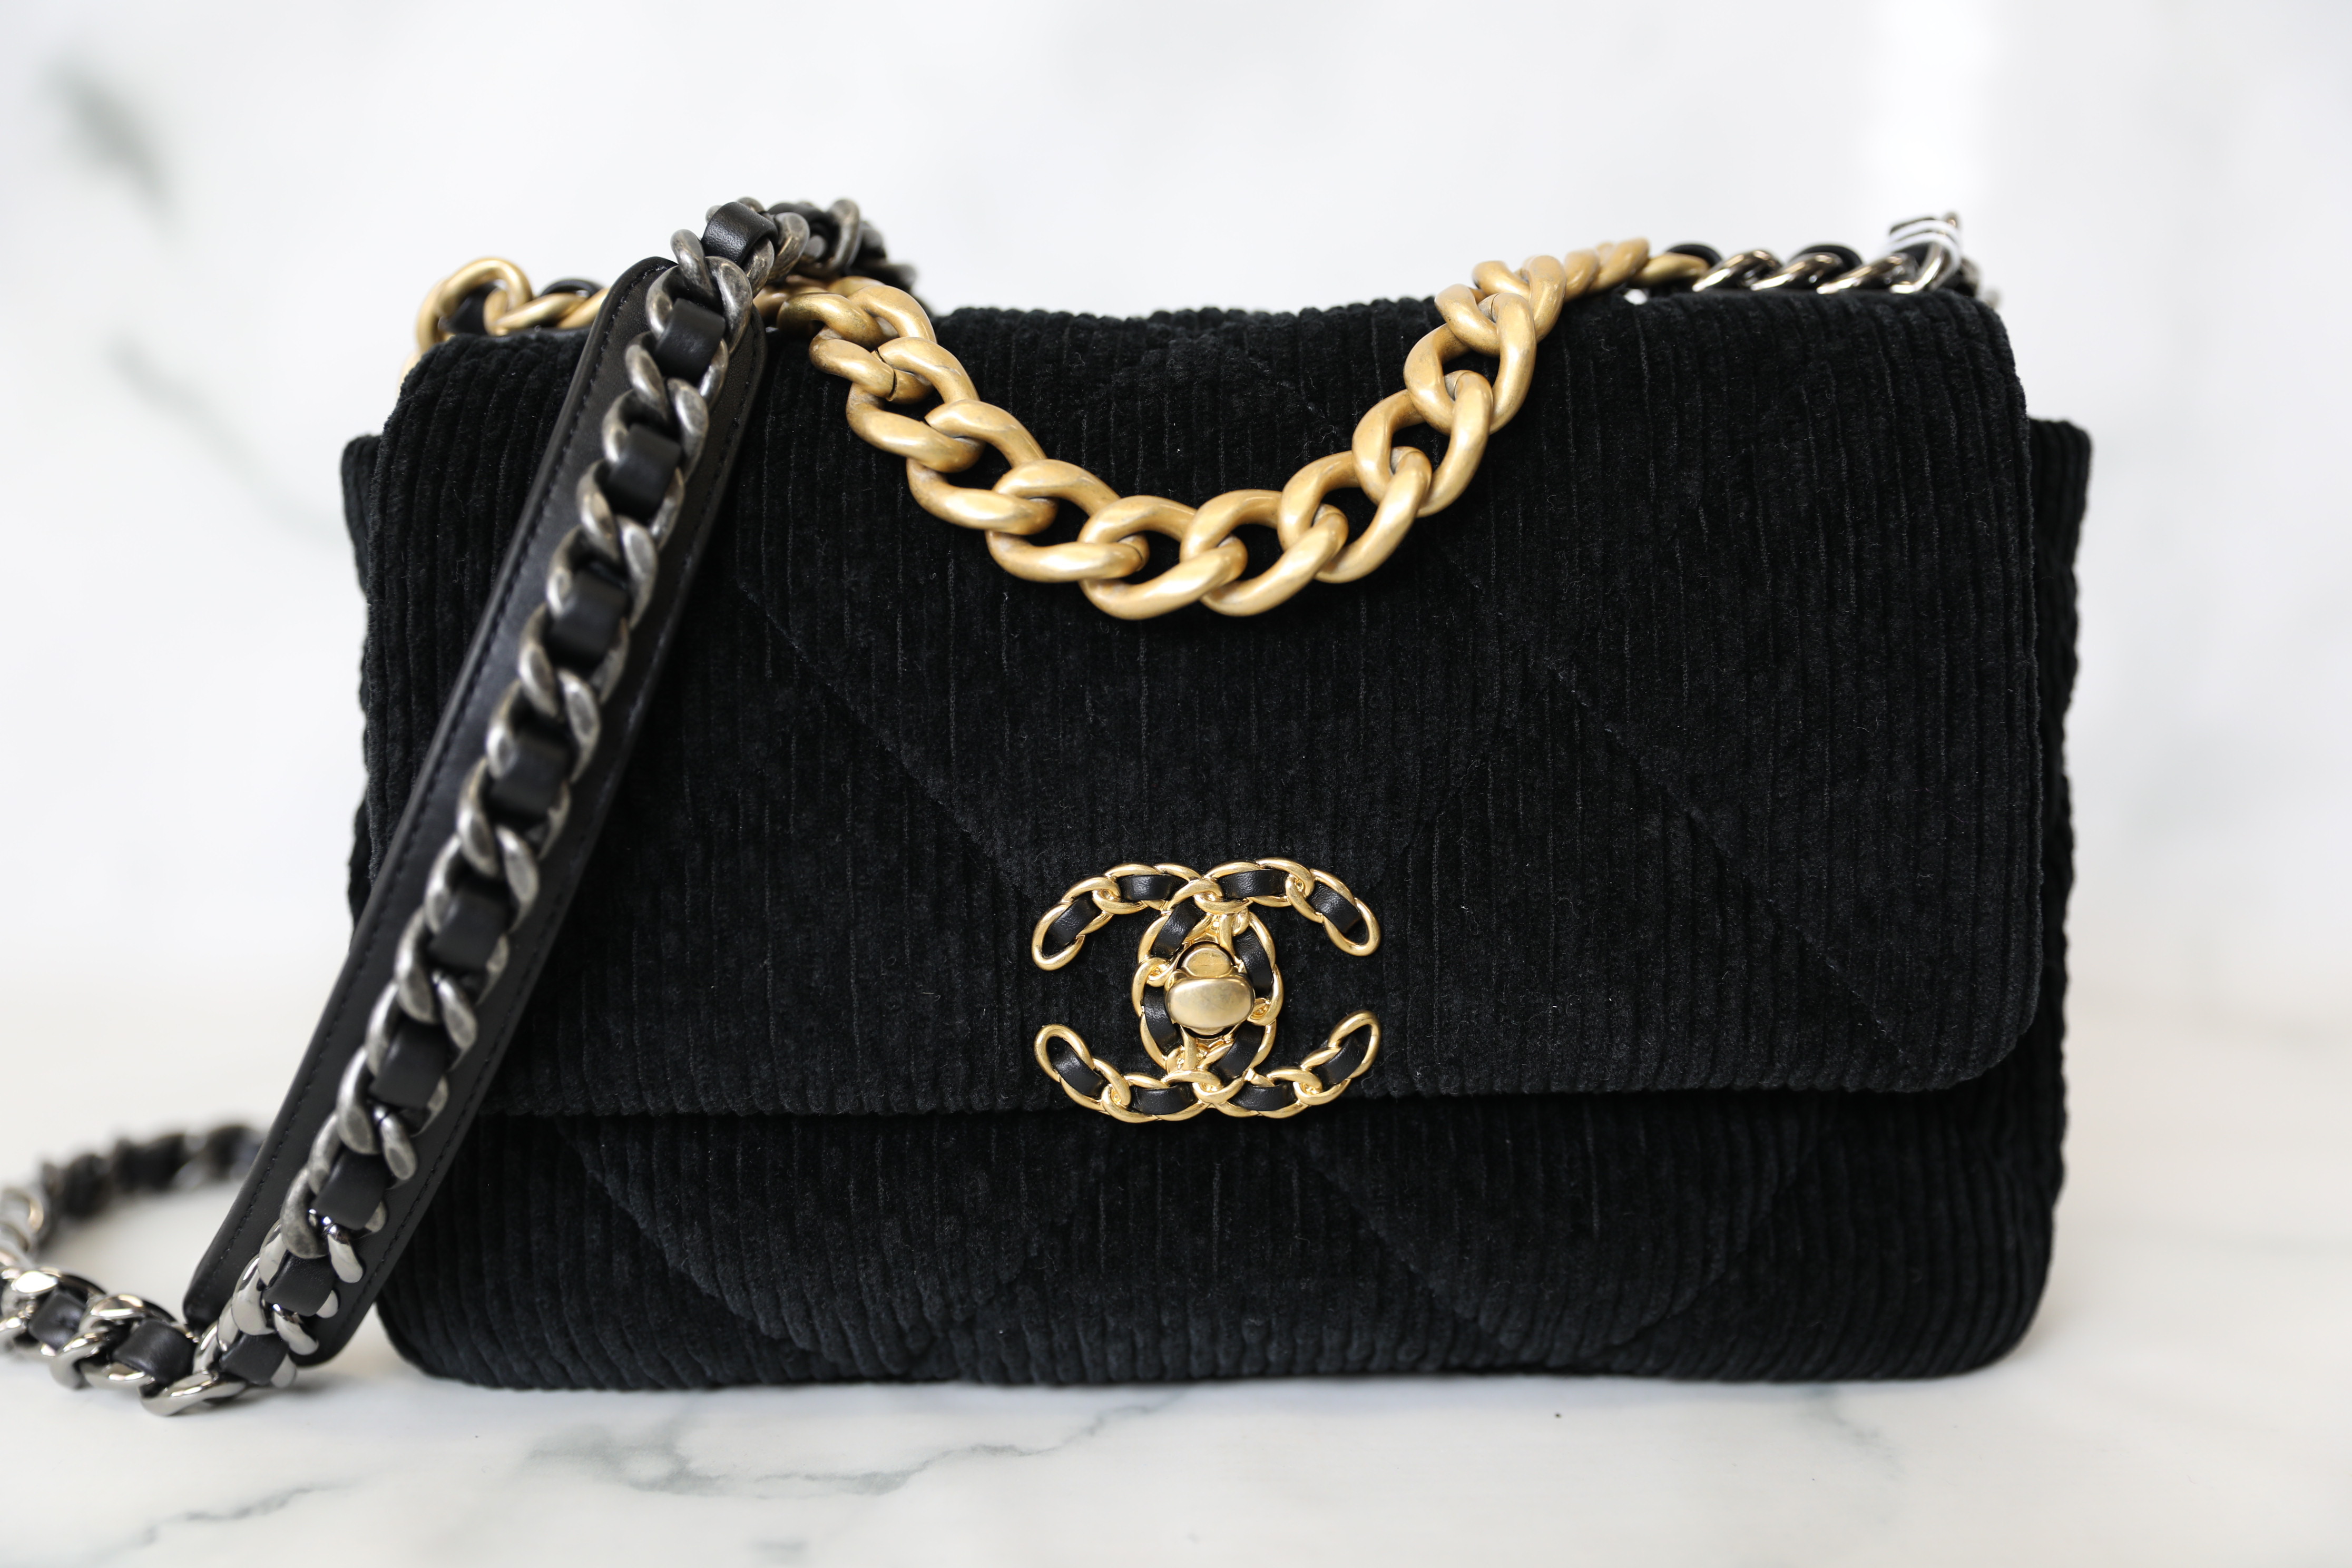 Chanel 19 Flap Bag Quilted Goatskin Maxi Black 8440929